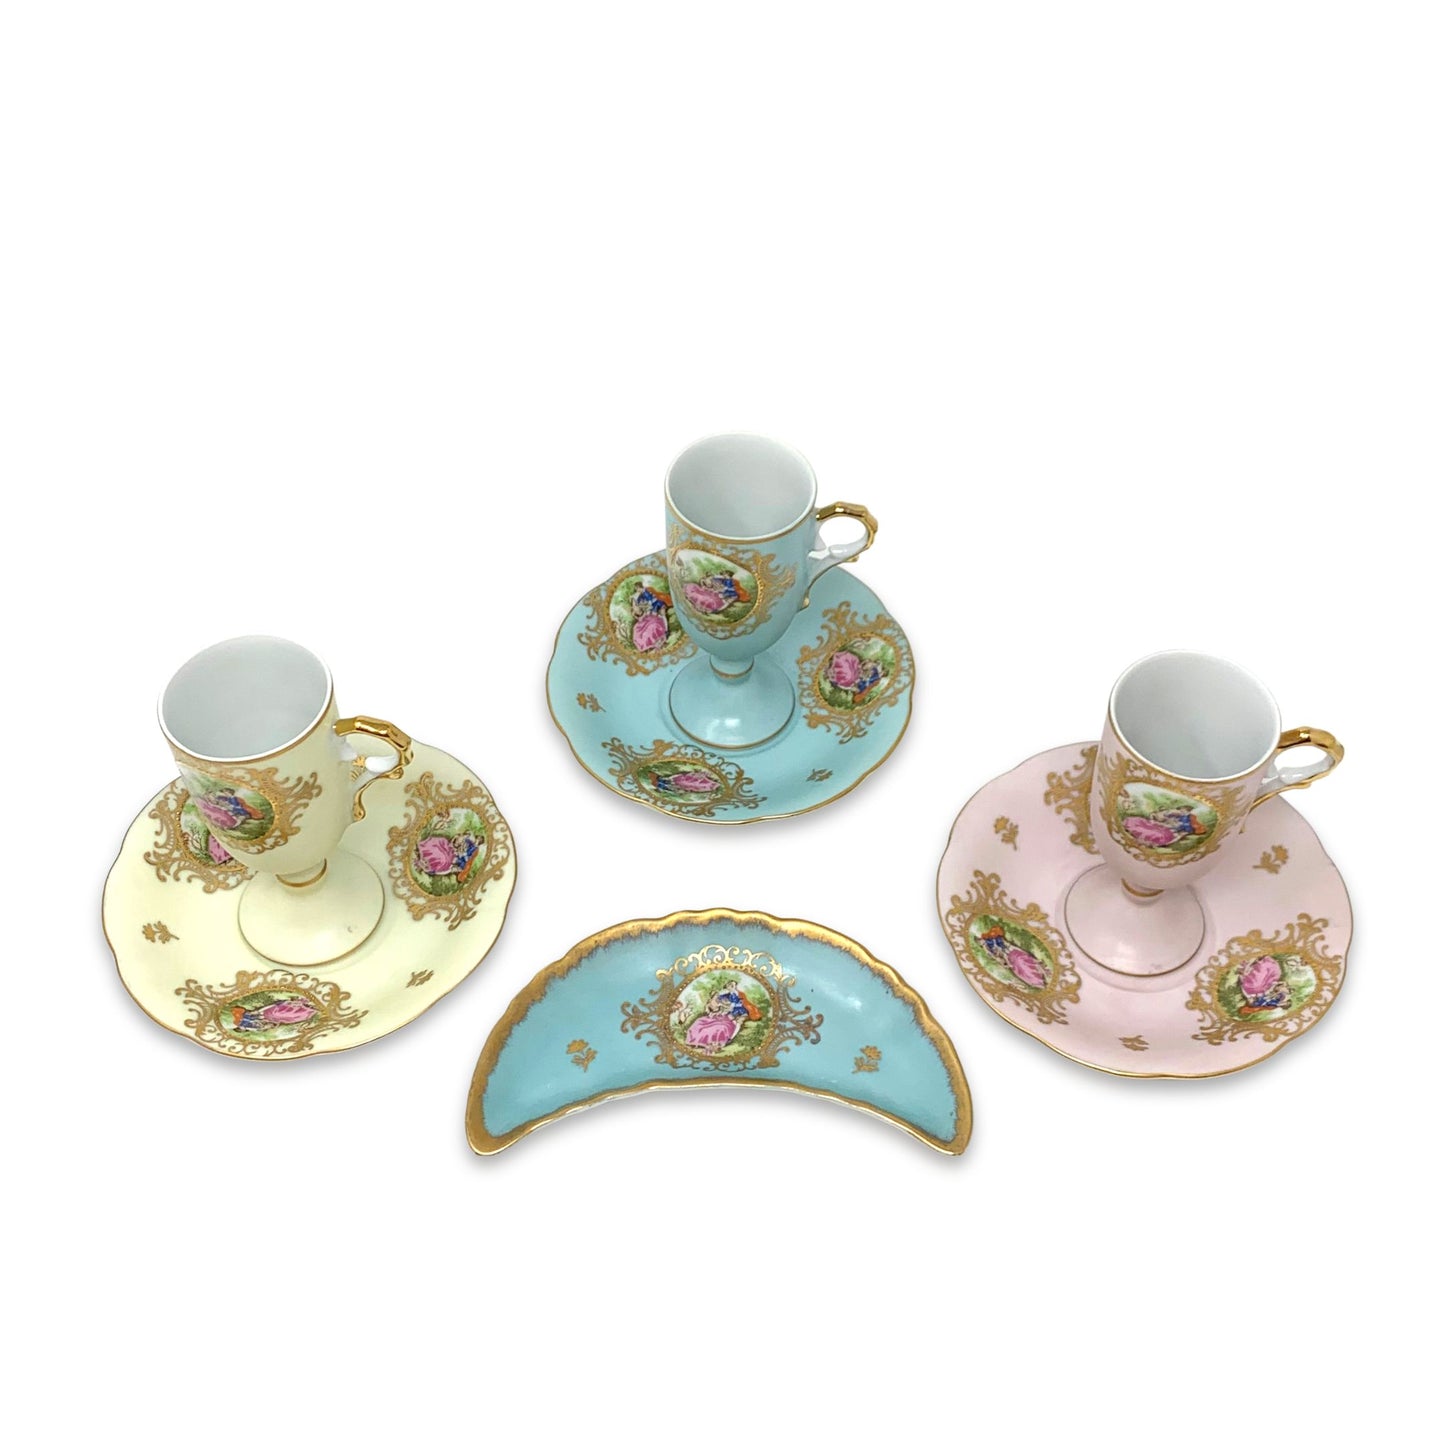 Lefton Courting Couple Footed Demitasse Cups & Saucers w/ Trinket Dish (7pcs)